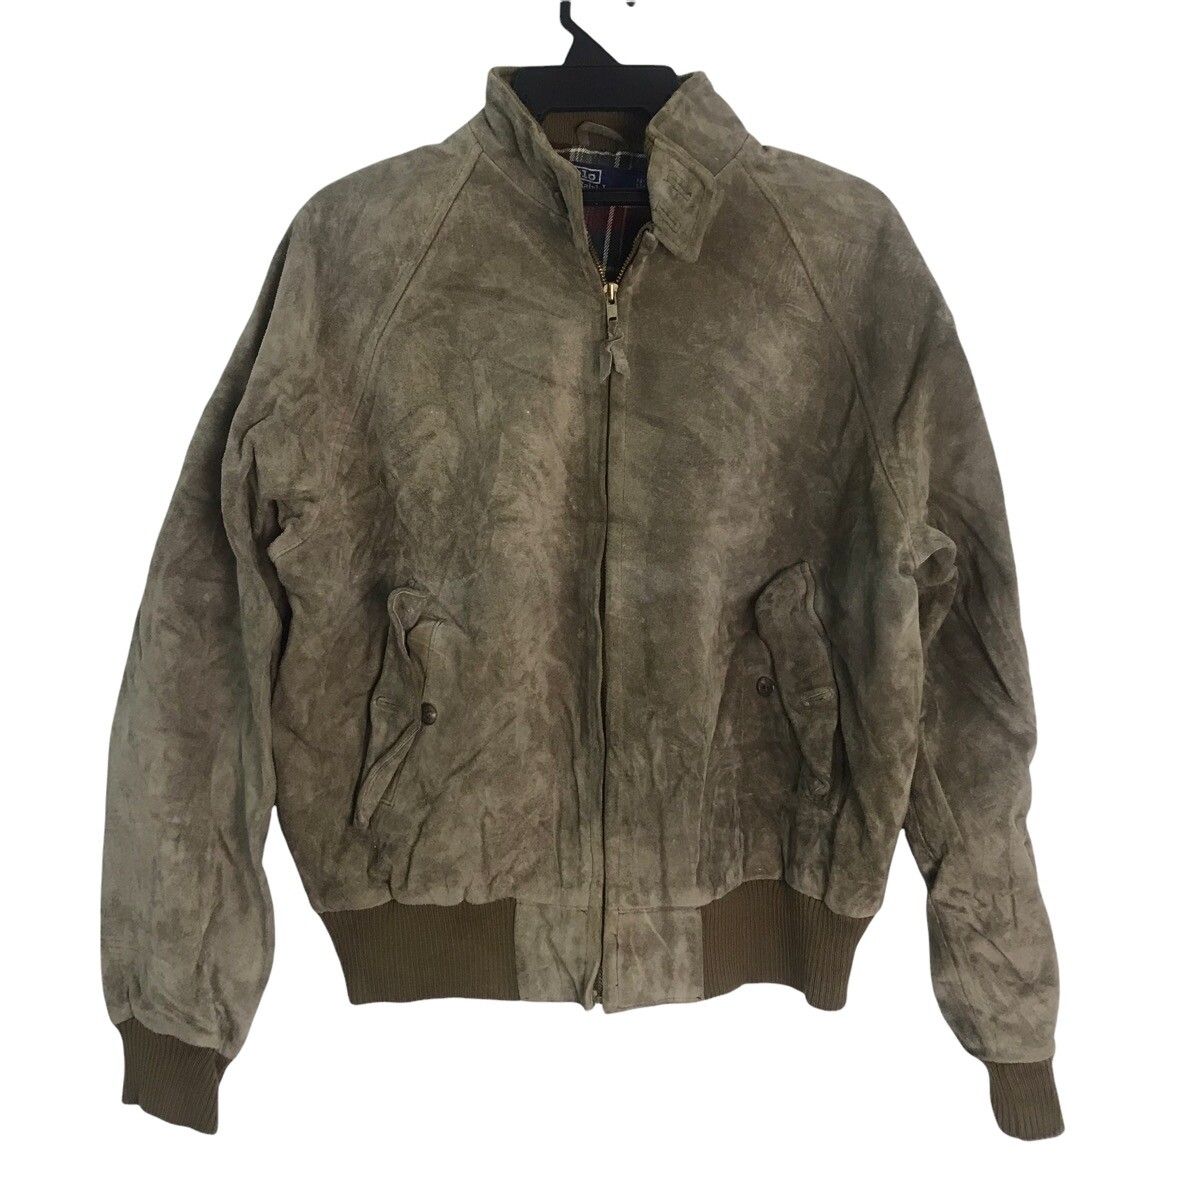 Vintage polo ralph lauren grey suede leather bomber - 2